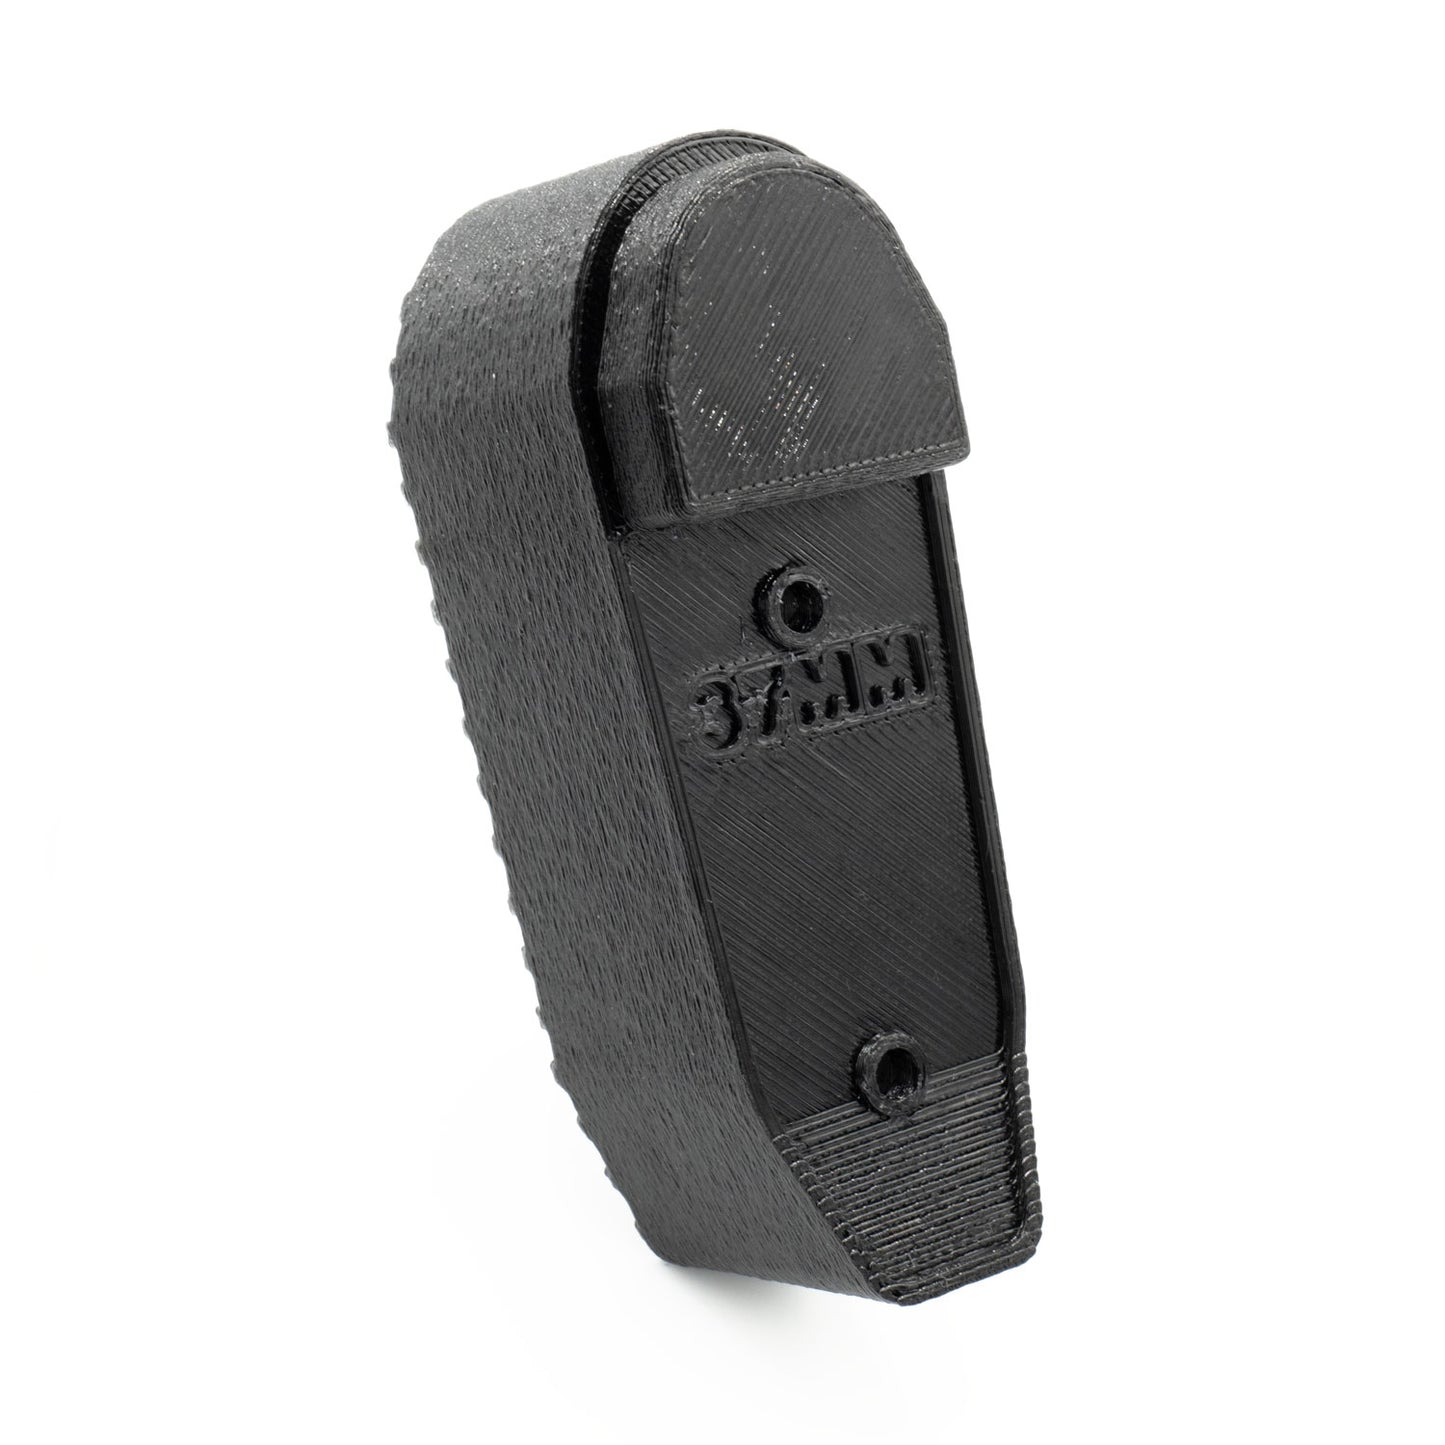 Butt-pad for Magpul SL-M/K Stock